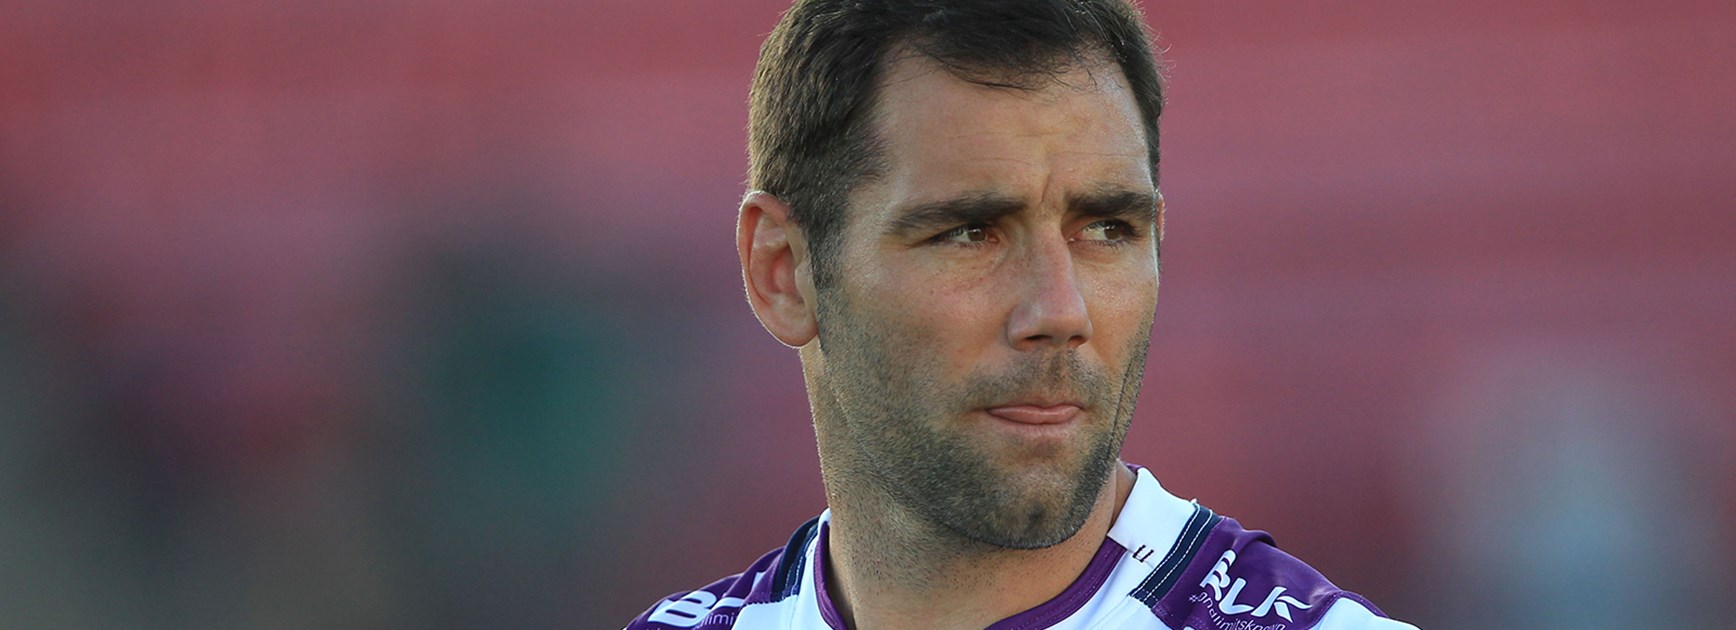 Melbourne Storm captain Cameron Smith was stunned to hear the news of the passing of Adelaide Crows AFL coach Phil Walsh.